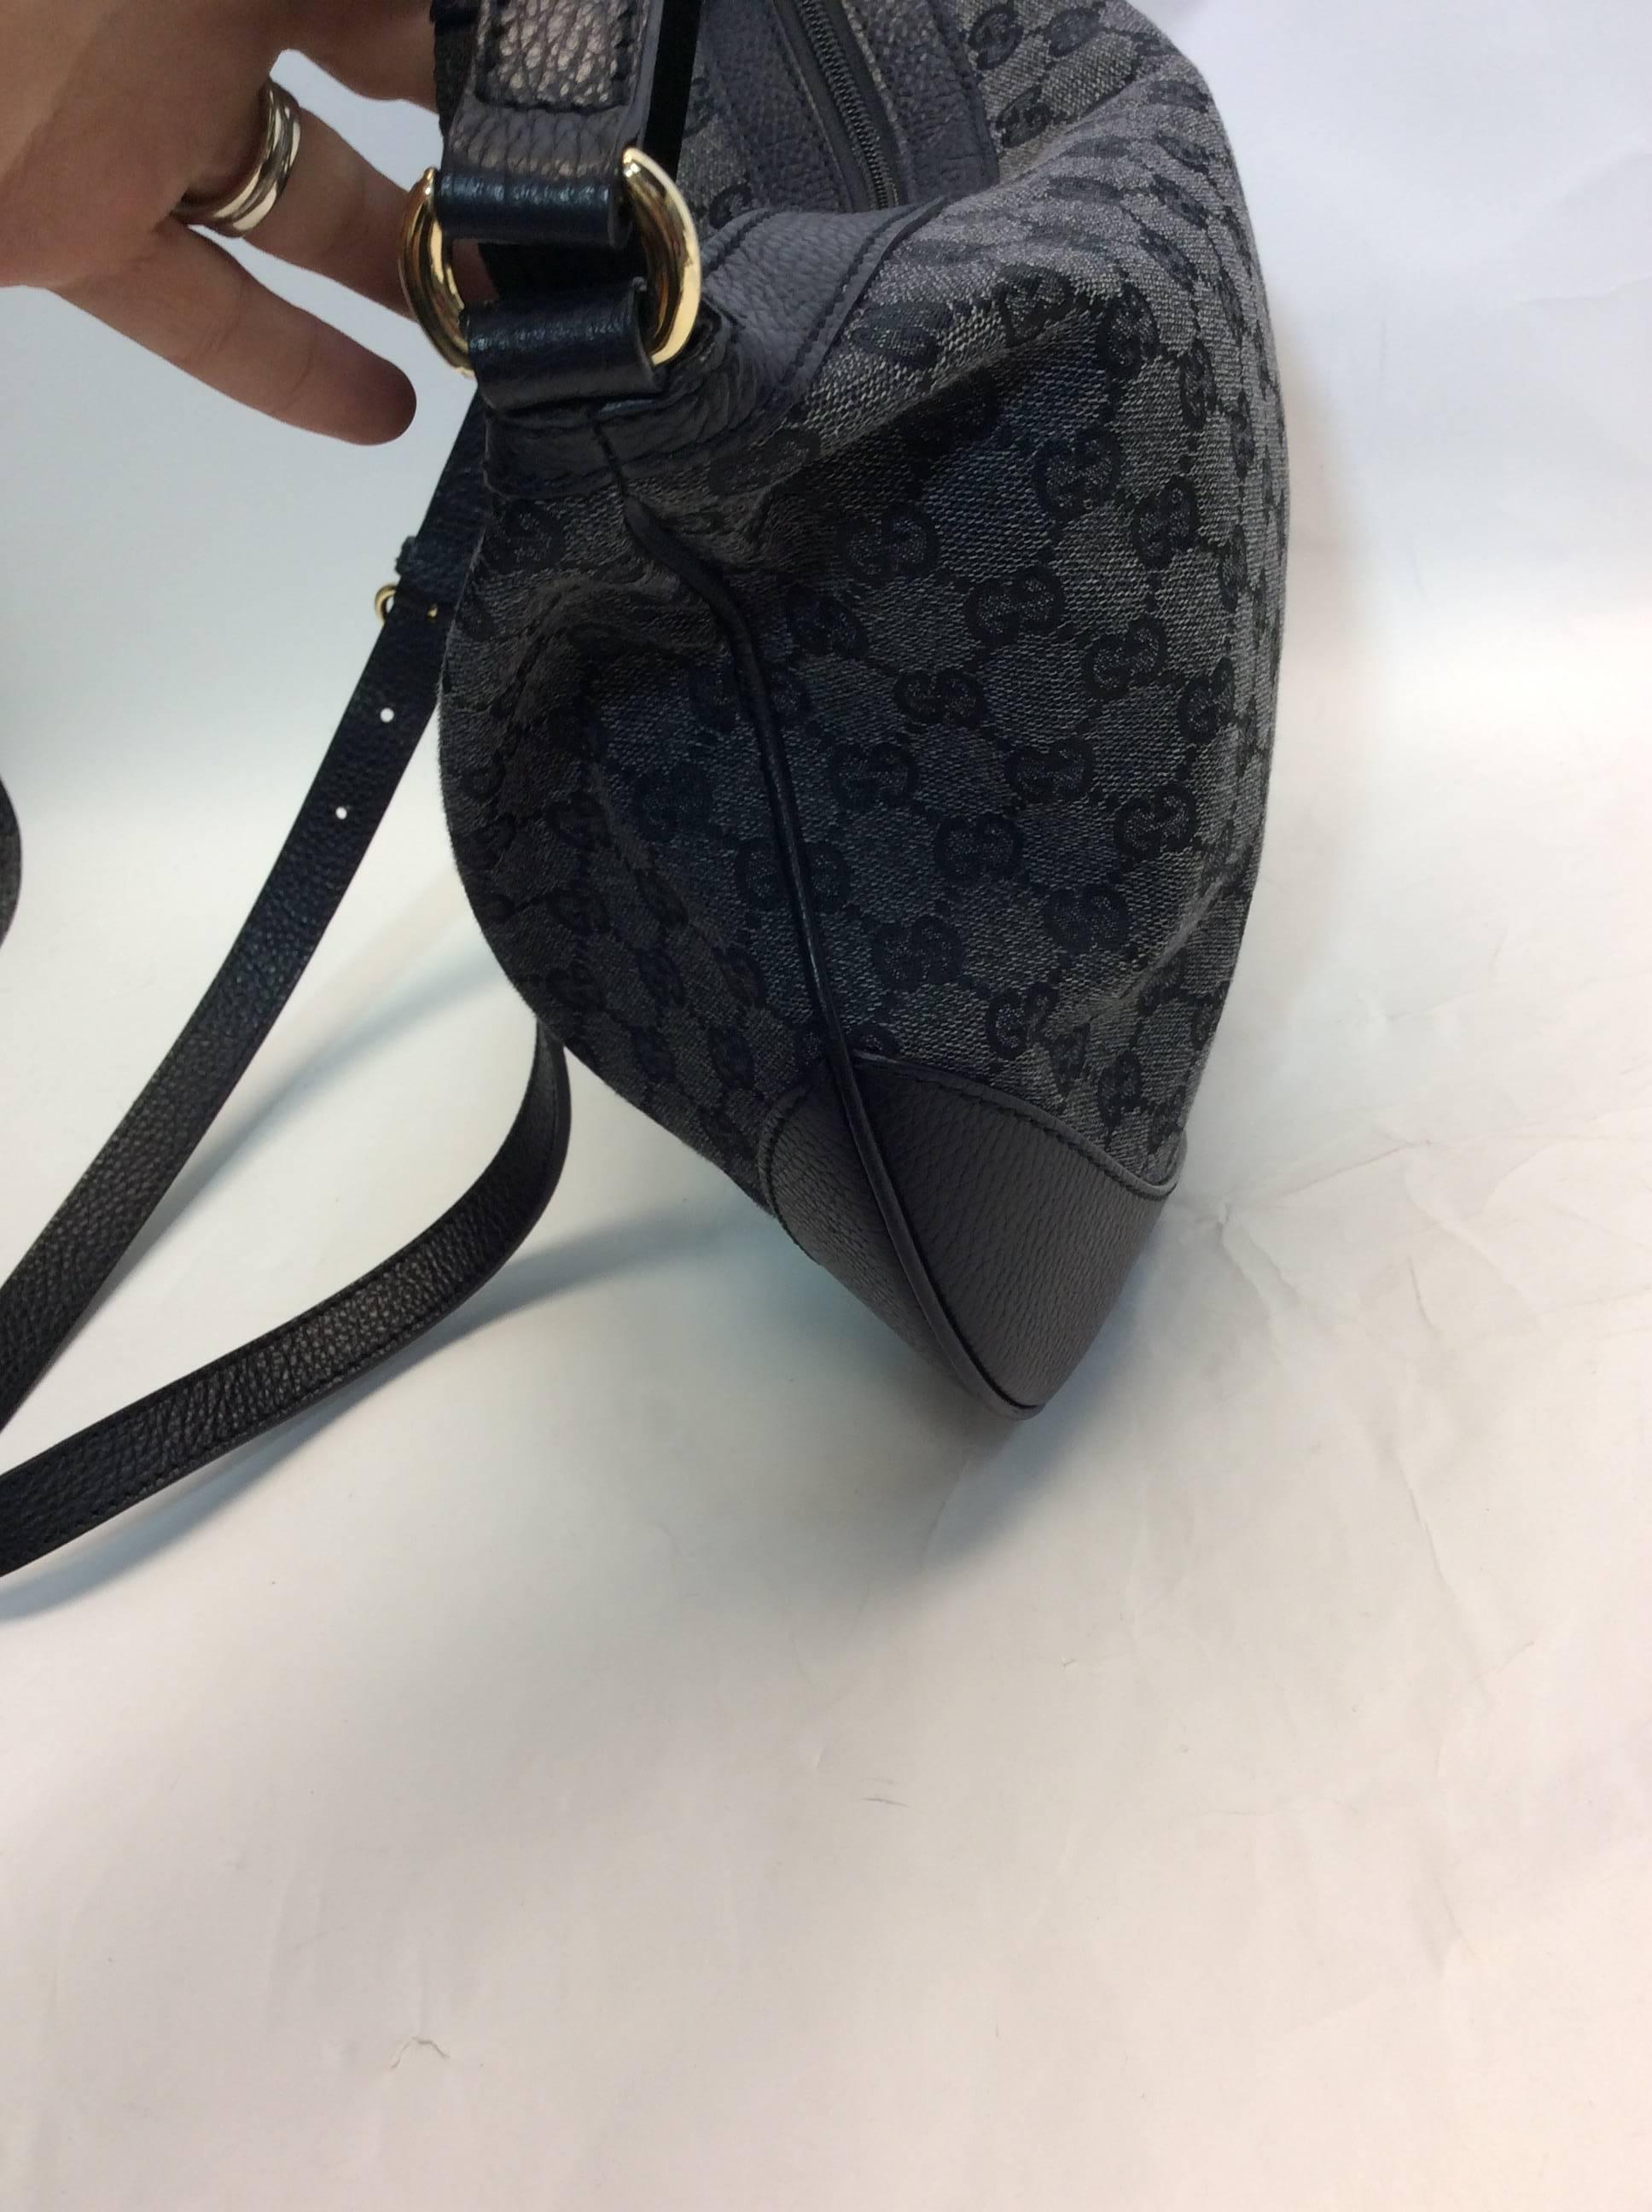 Gucci Black Crossbody Bag In Excellent Condition For Sale In Narberth, PA